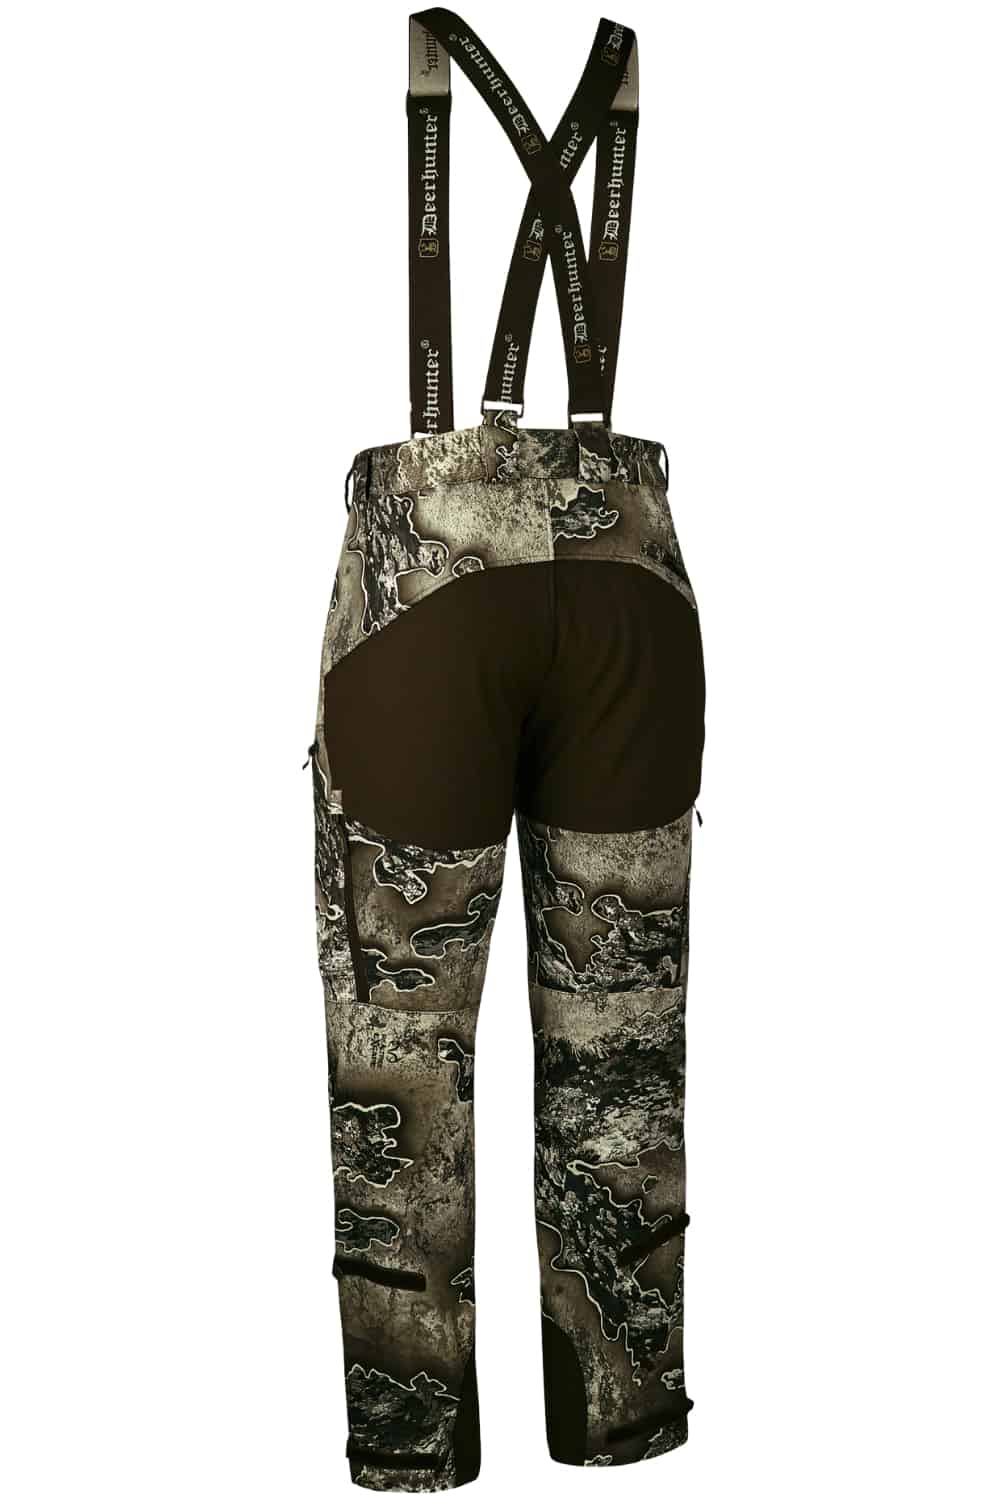 Deerhunter Excape Softshell Trousers in realtree excape 